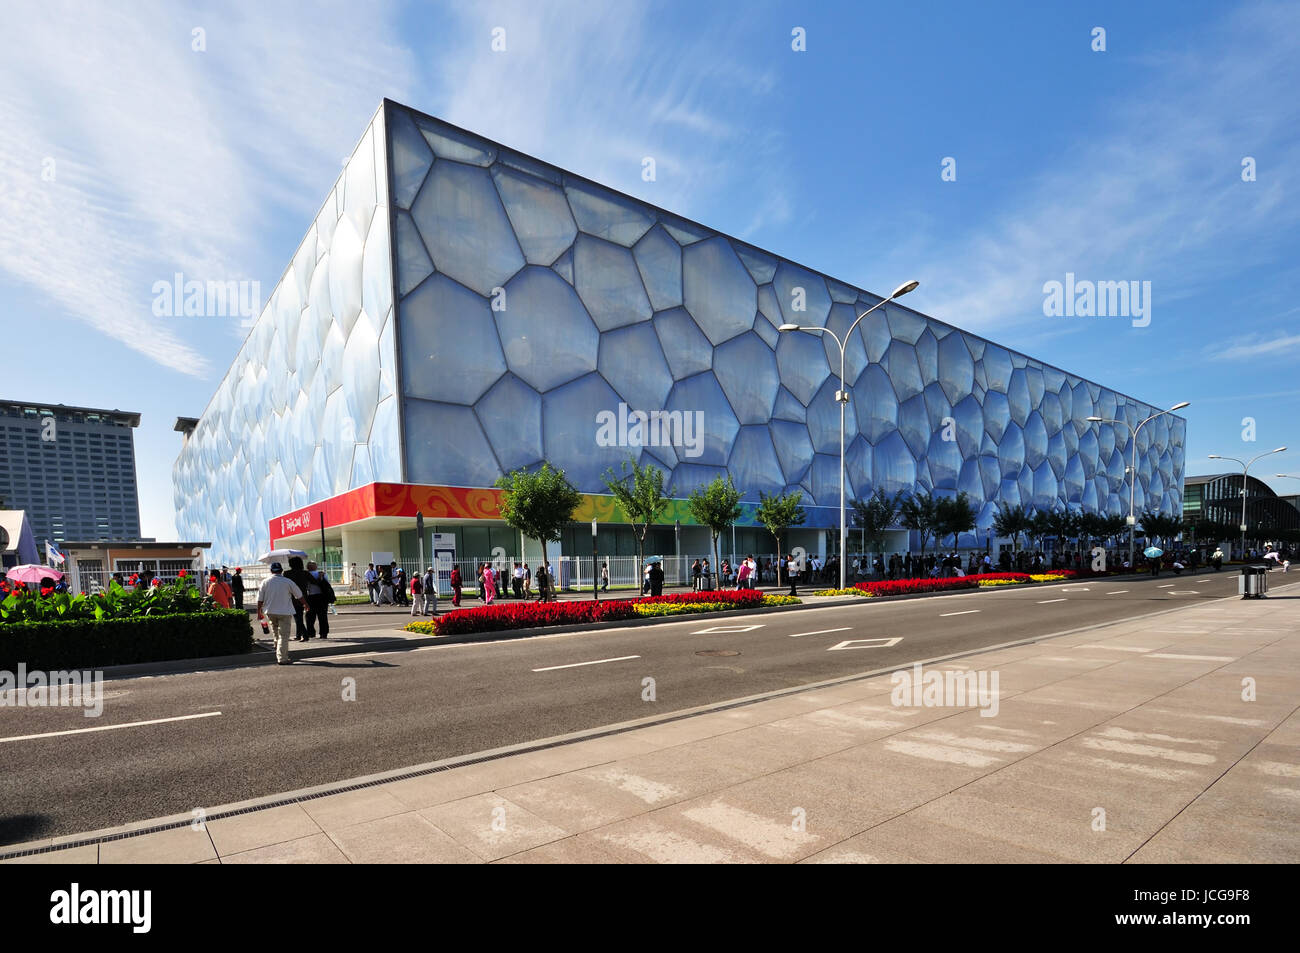 BEIJING, CHINA - SEPTEMBER 21, 2009: Exterior of The Beijing National Aquatics Center. It is also known as “Water Cube”, is one of the best venues of  Stock Photo